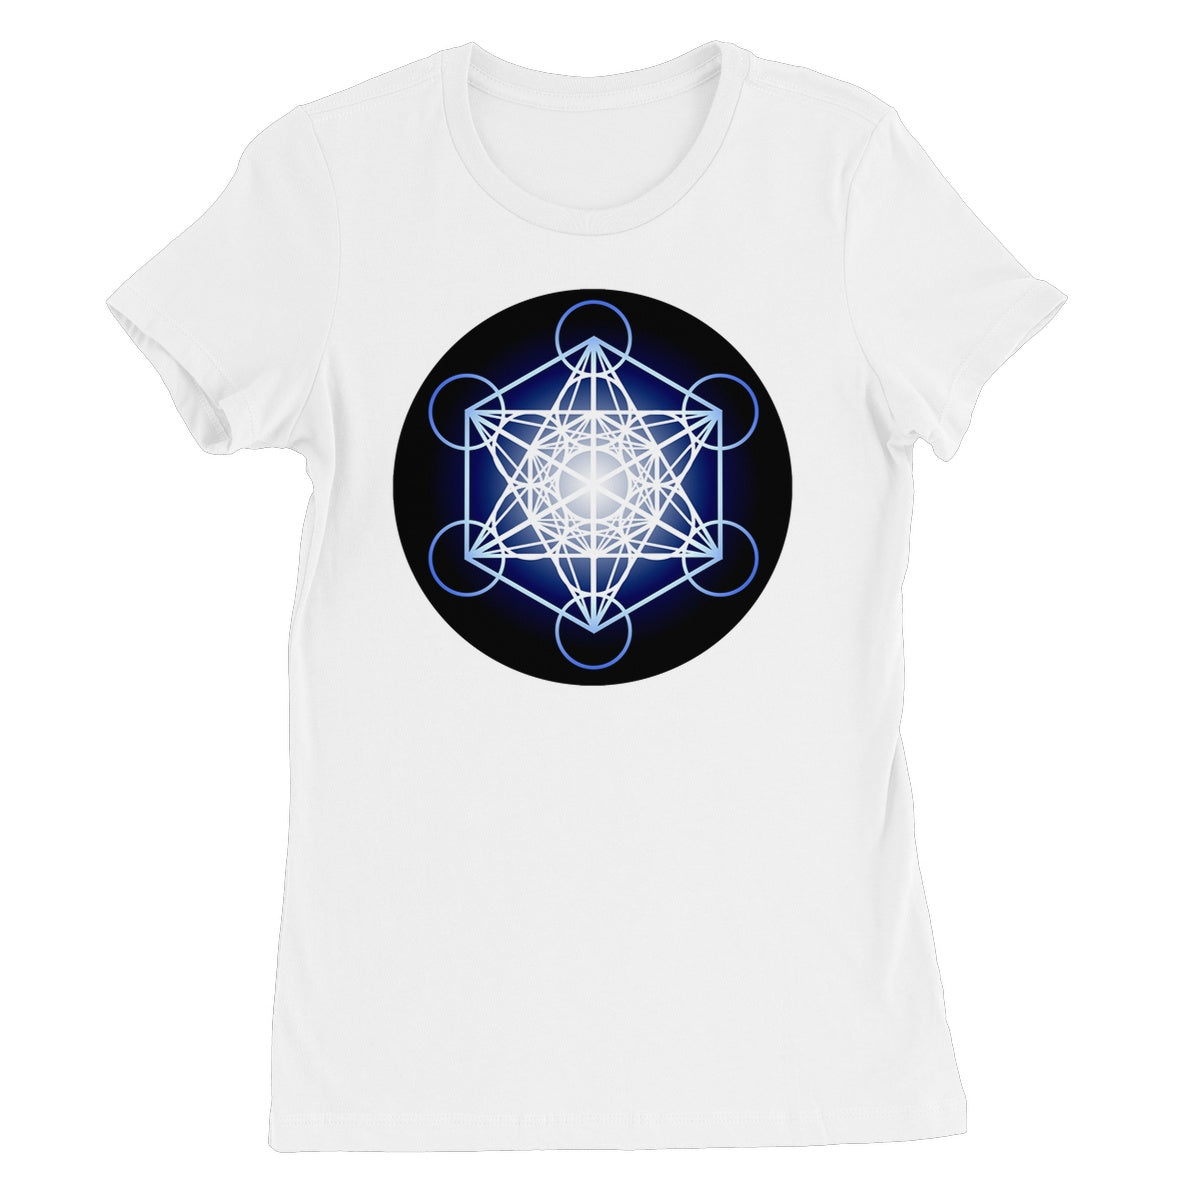 Metatron's Cube in Blue Women's T-Shirt - Nature of Flowers